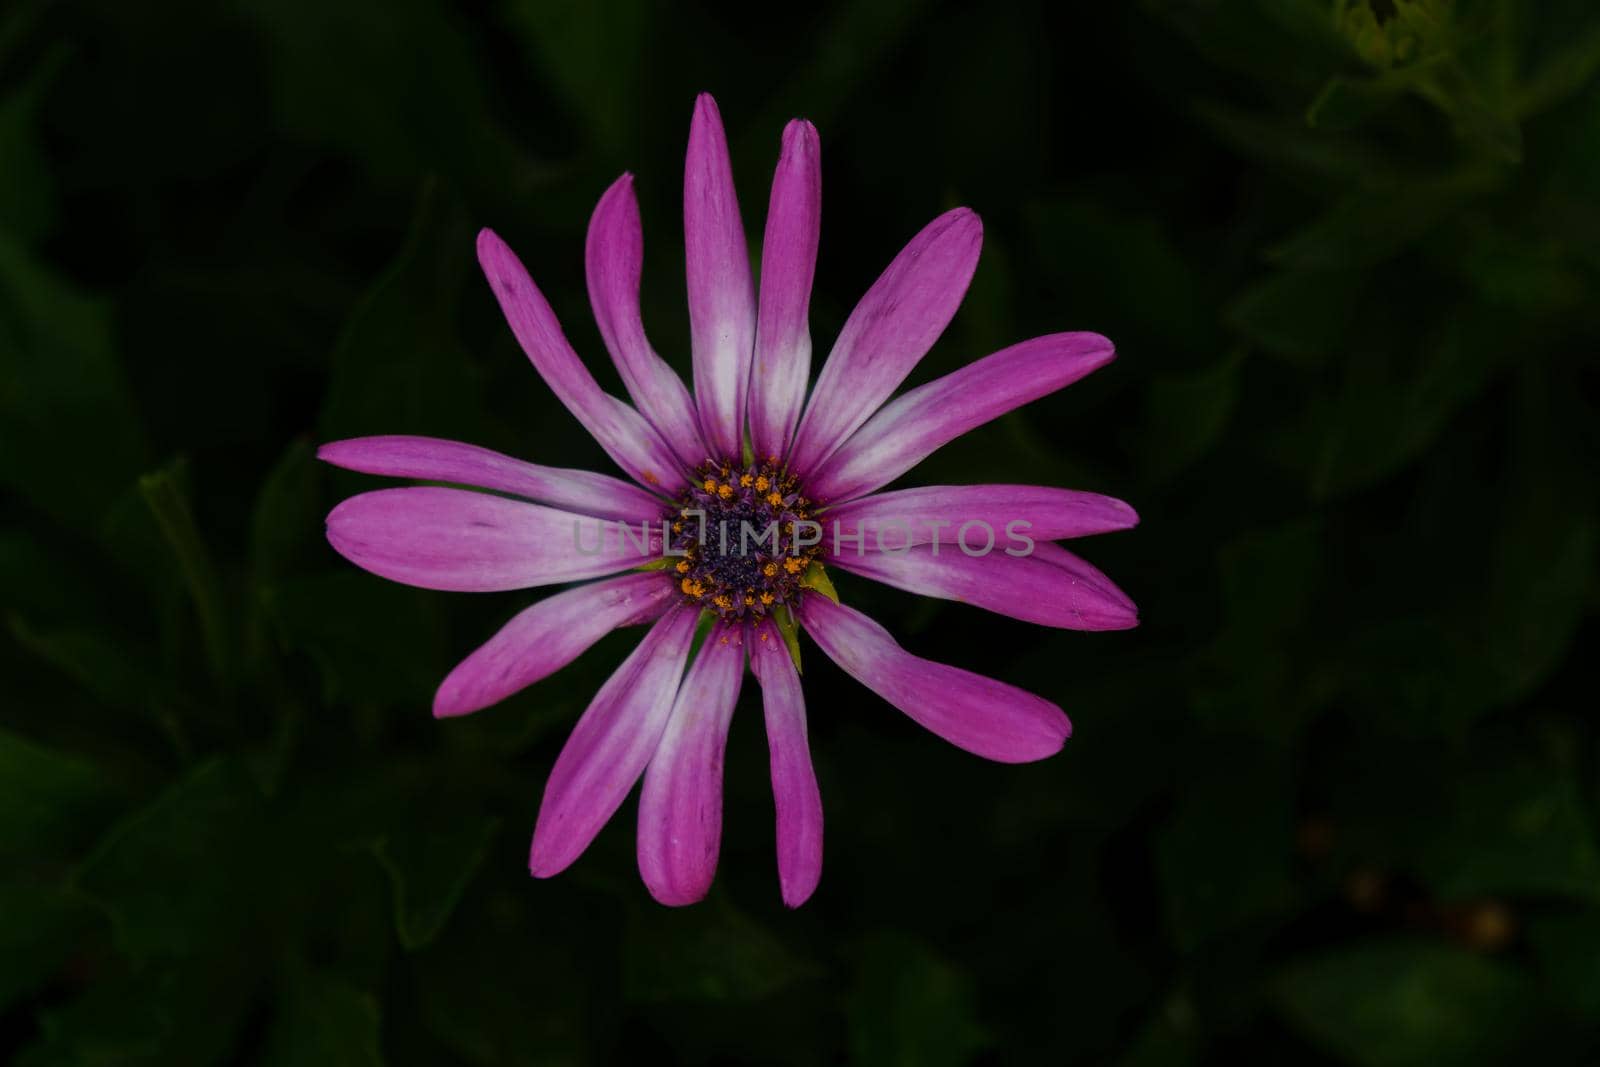 close-up of a purple daisy with dark background out of focus